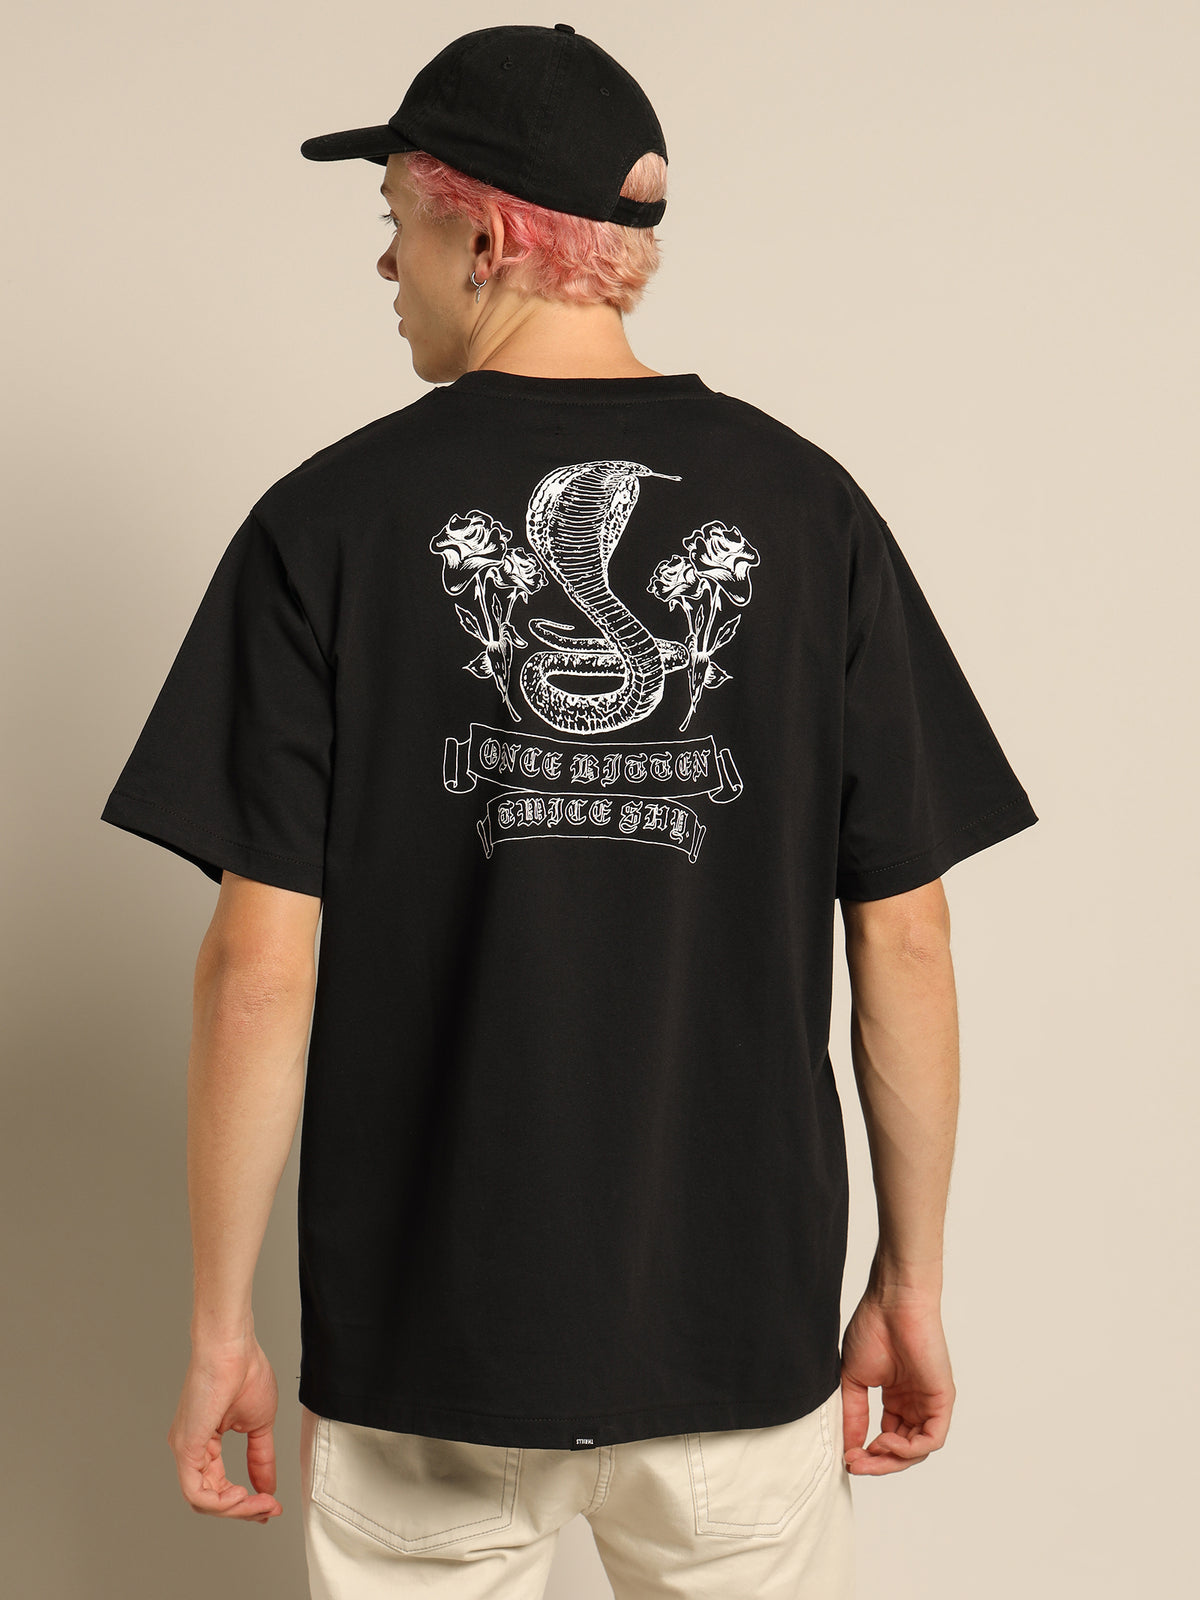 Superstition Merch Fit T-Shirt in Black